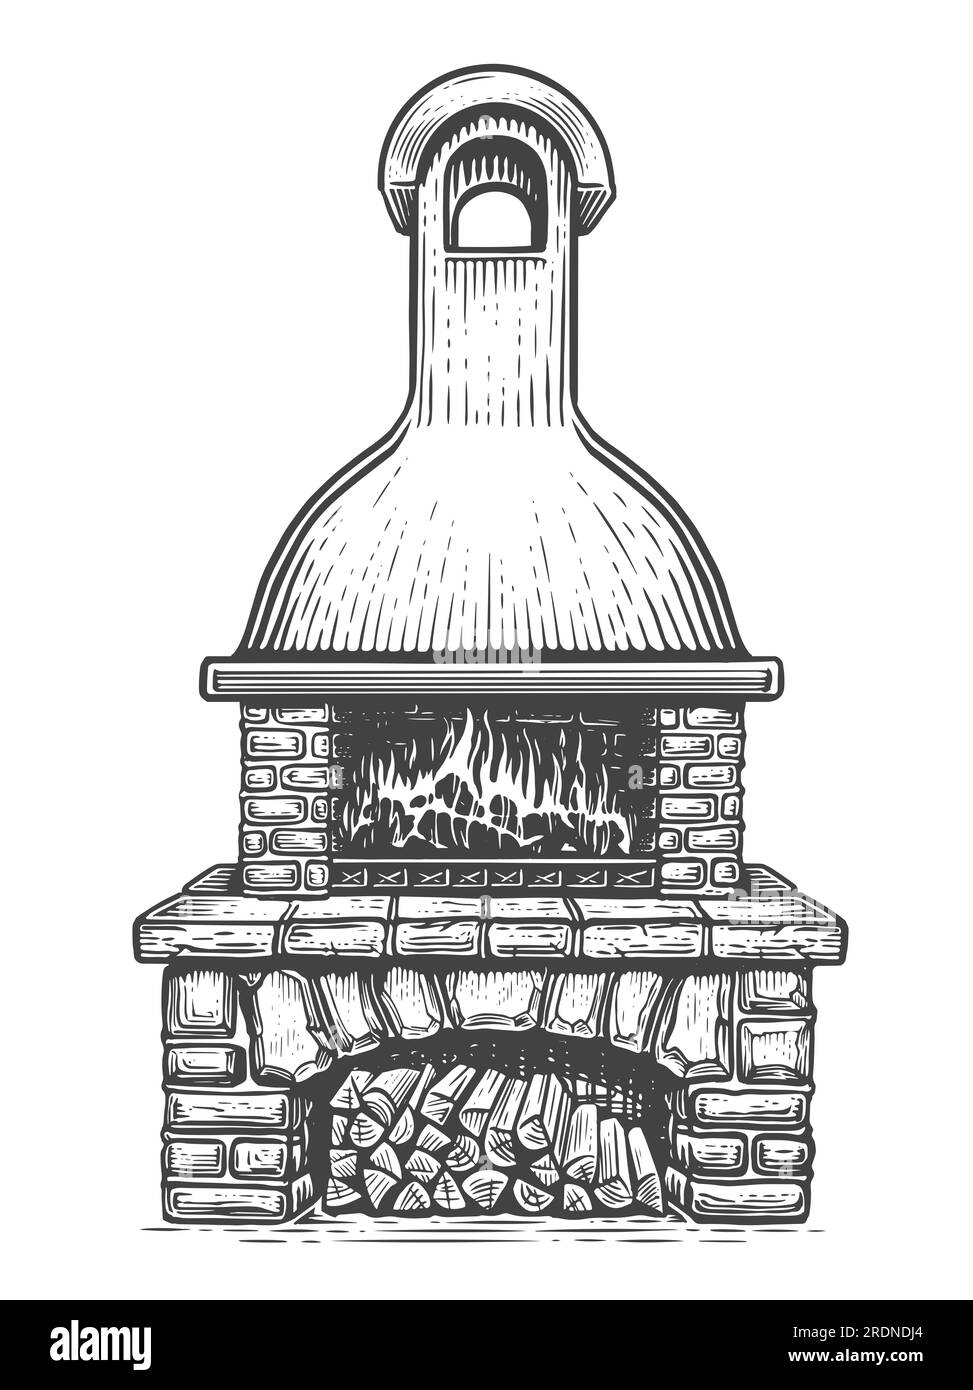 Stone garden stove with fire and firewood. Cooking grill food, barbecue sketch vintage illustration engraving style Stock Photo